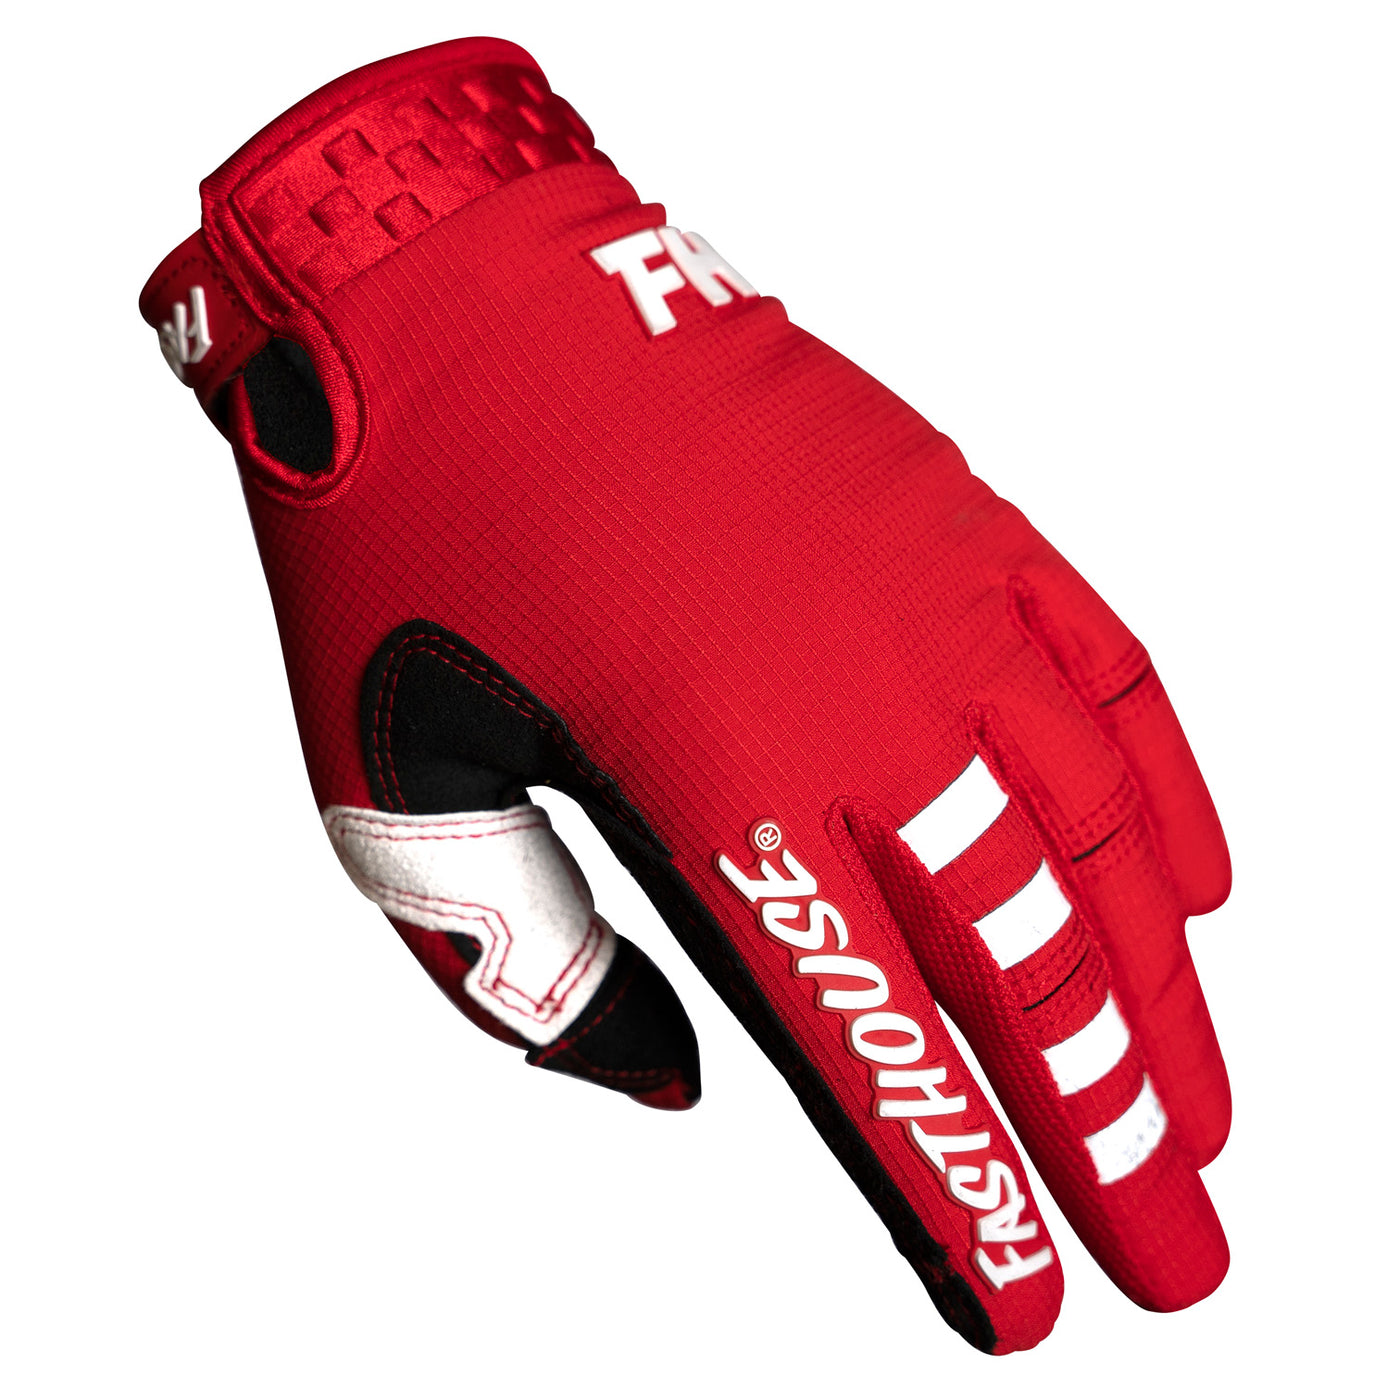 Fasthouse Elrod Air Glove